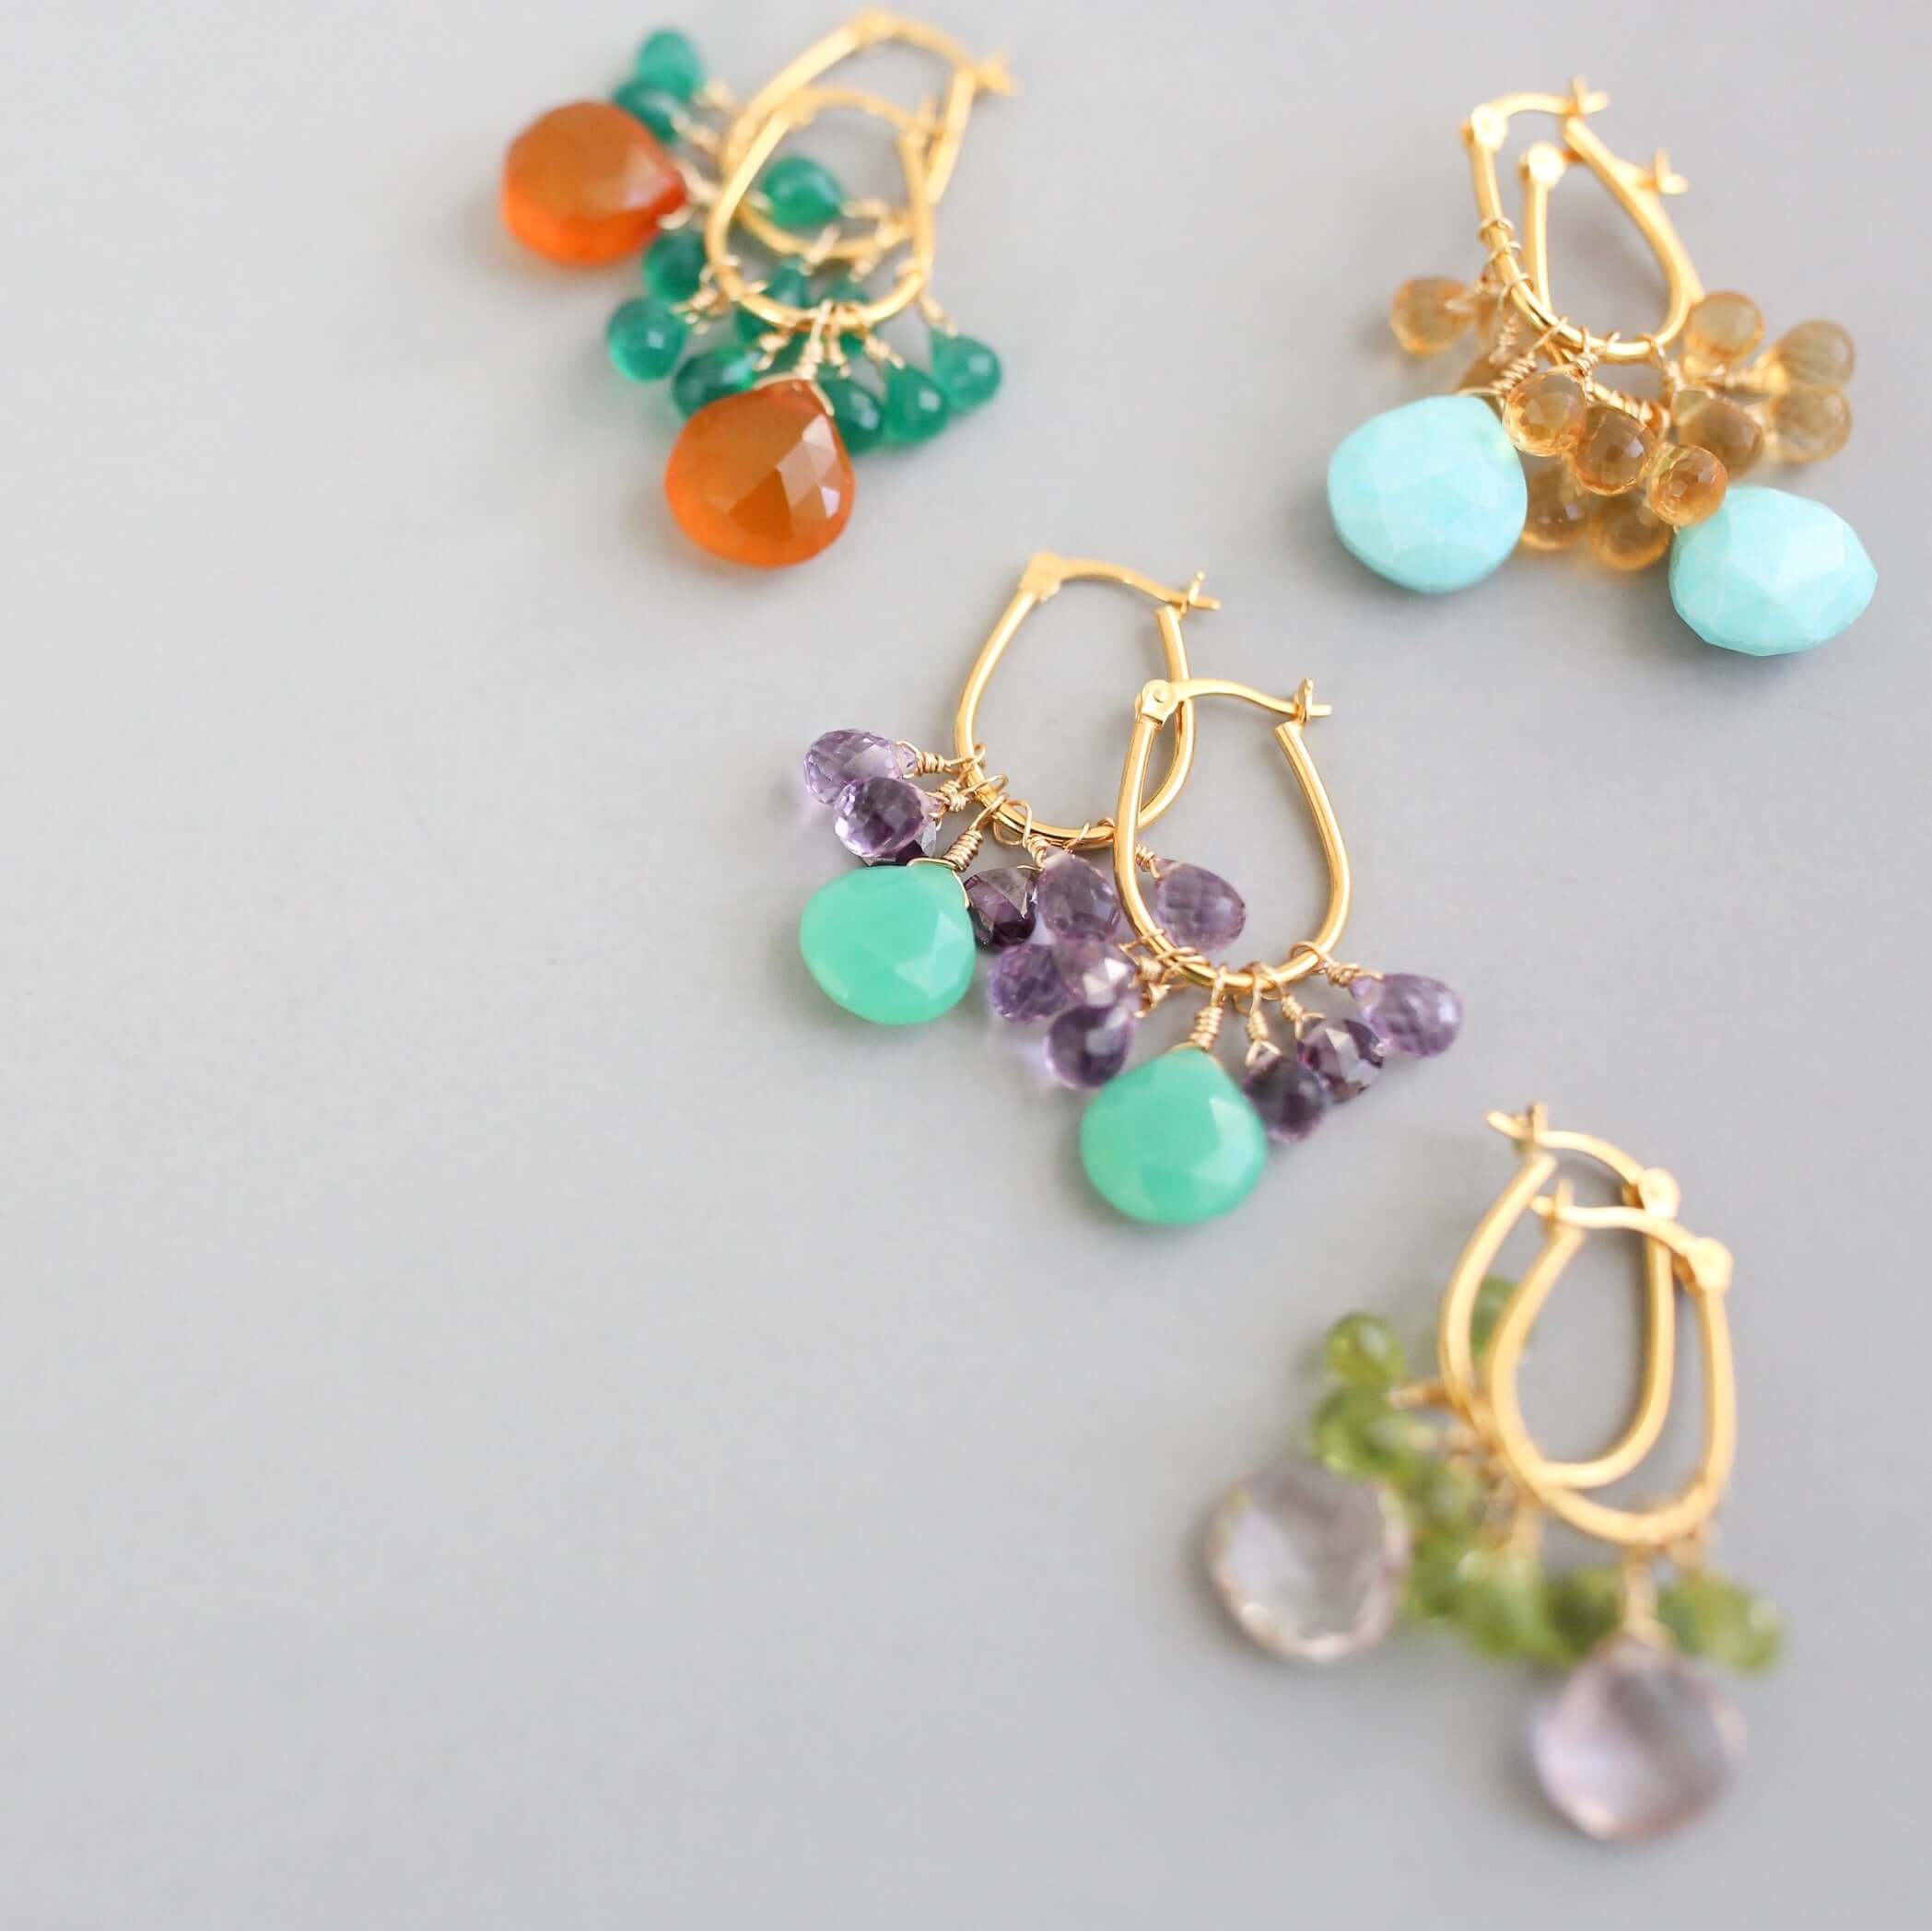 Colorful Gold Earrings